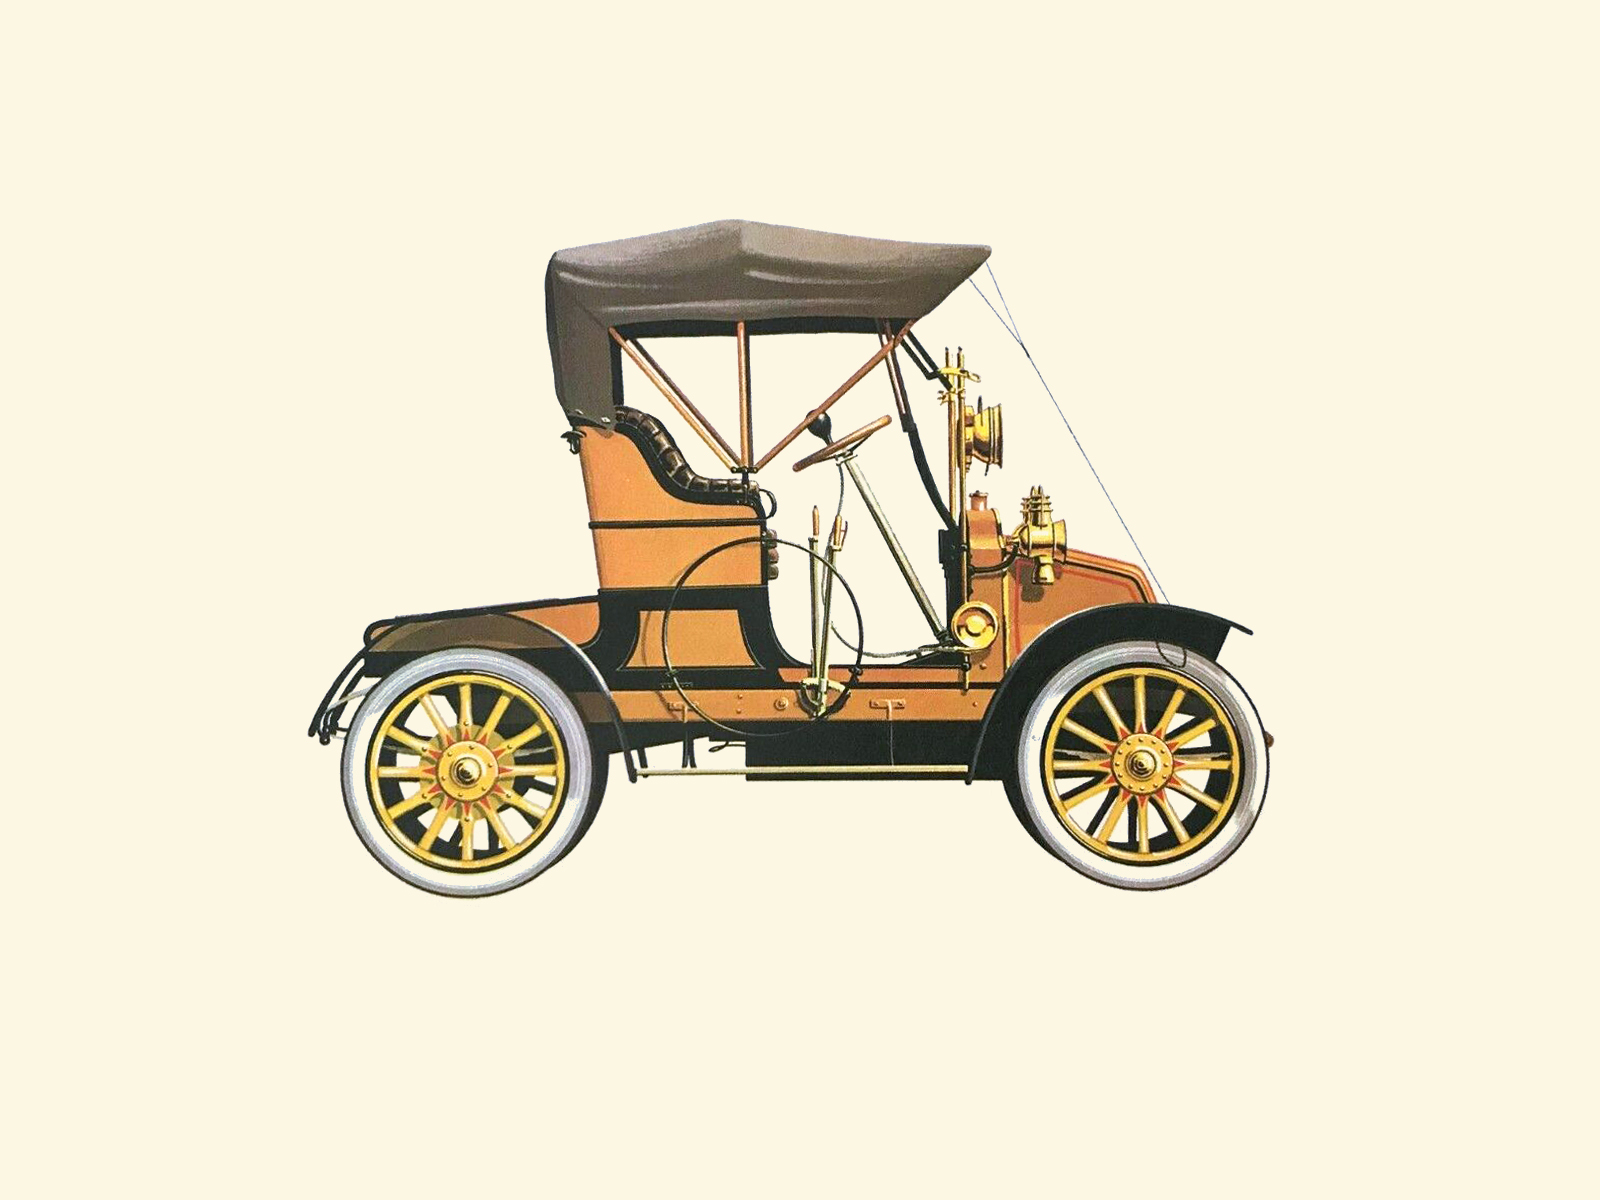 1908 Renault 2 cylindres - Illustrated by Pierre Dumont